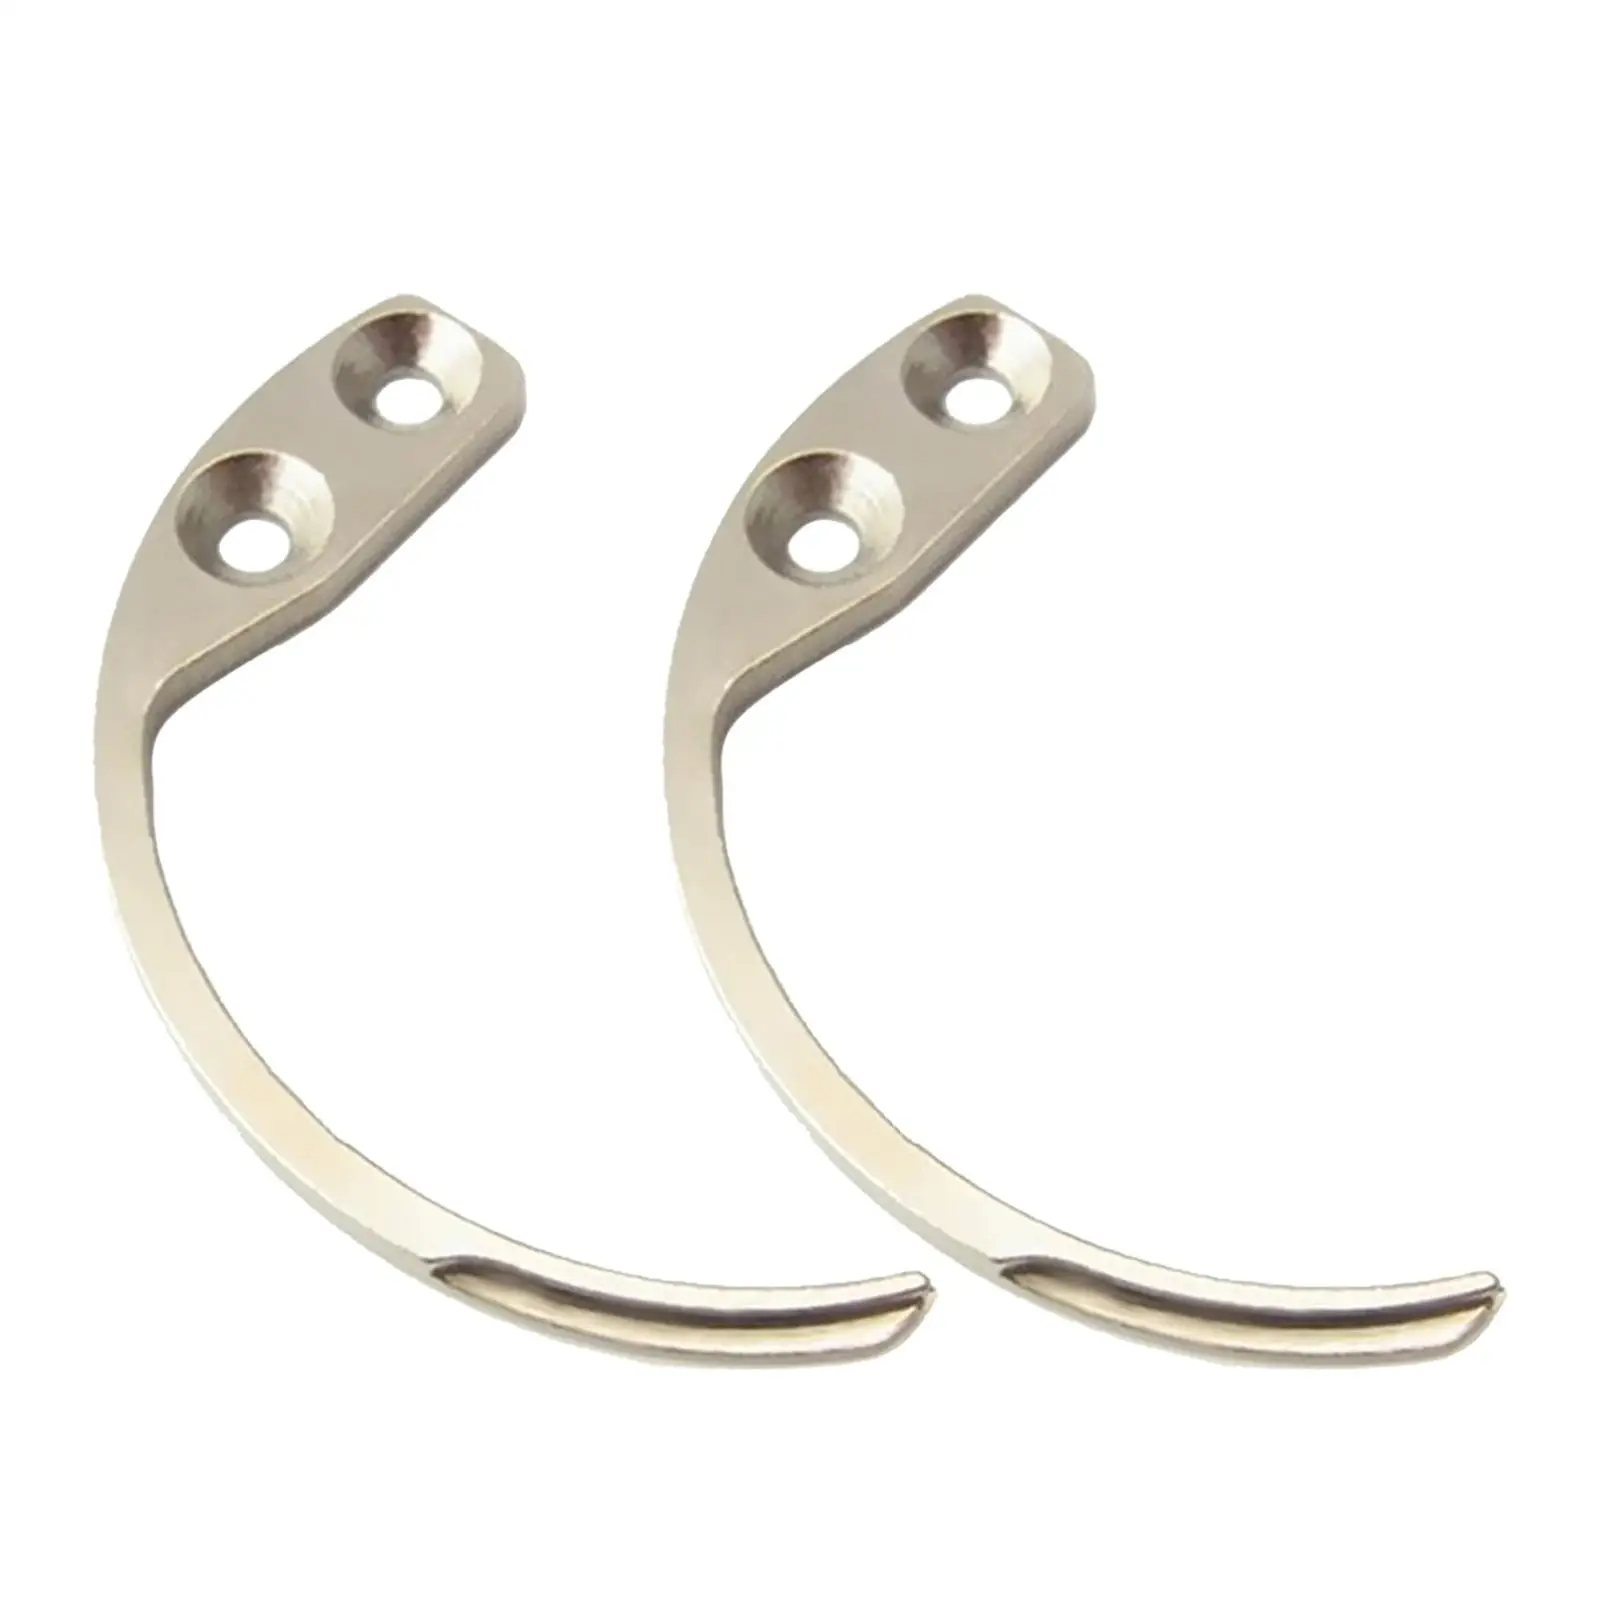 2 x Detacher Hooks Eas tags Pin Anti-Theft Buckle Hook for retail shop tag Anti-Theft Buckles Hard Tag Hats Security Tags